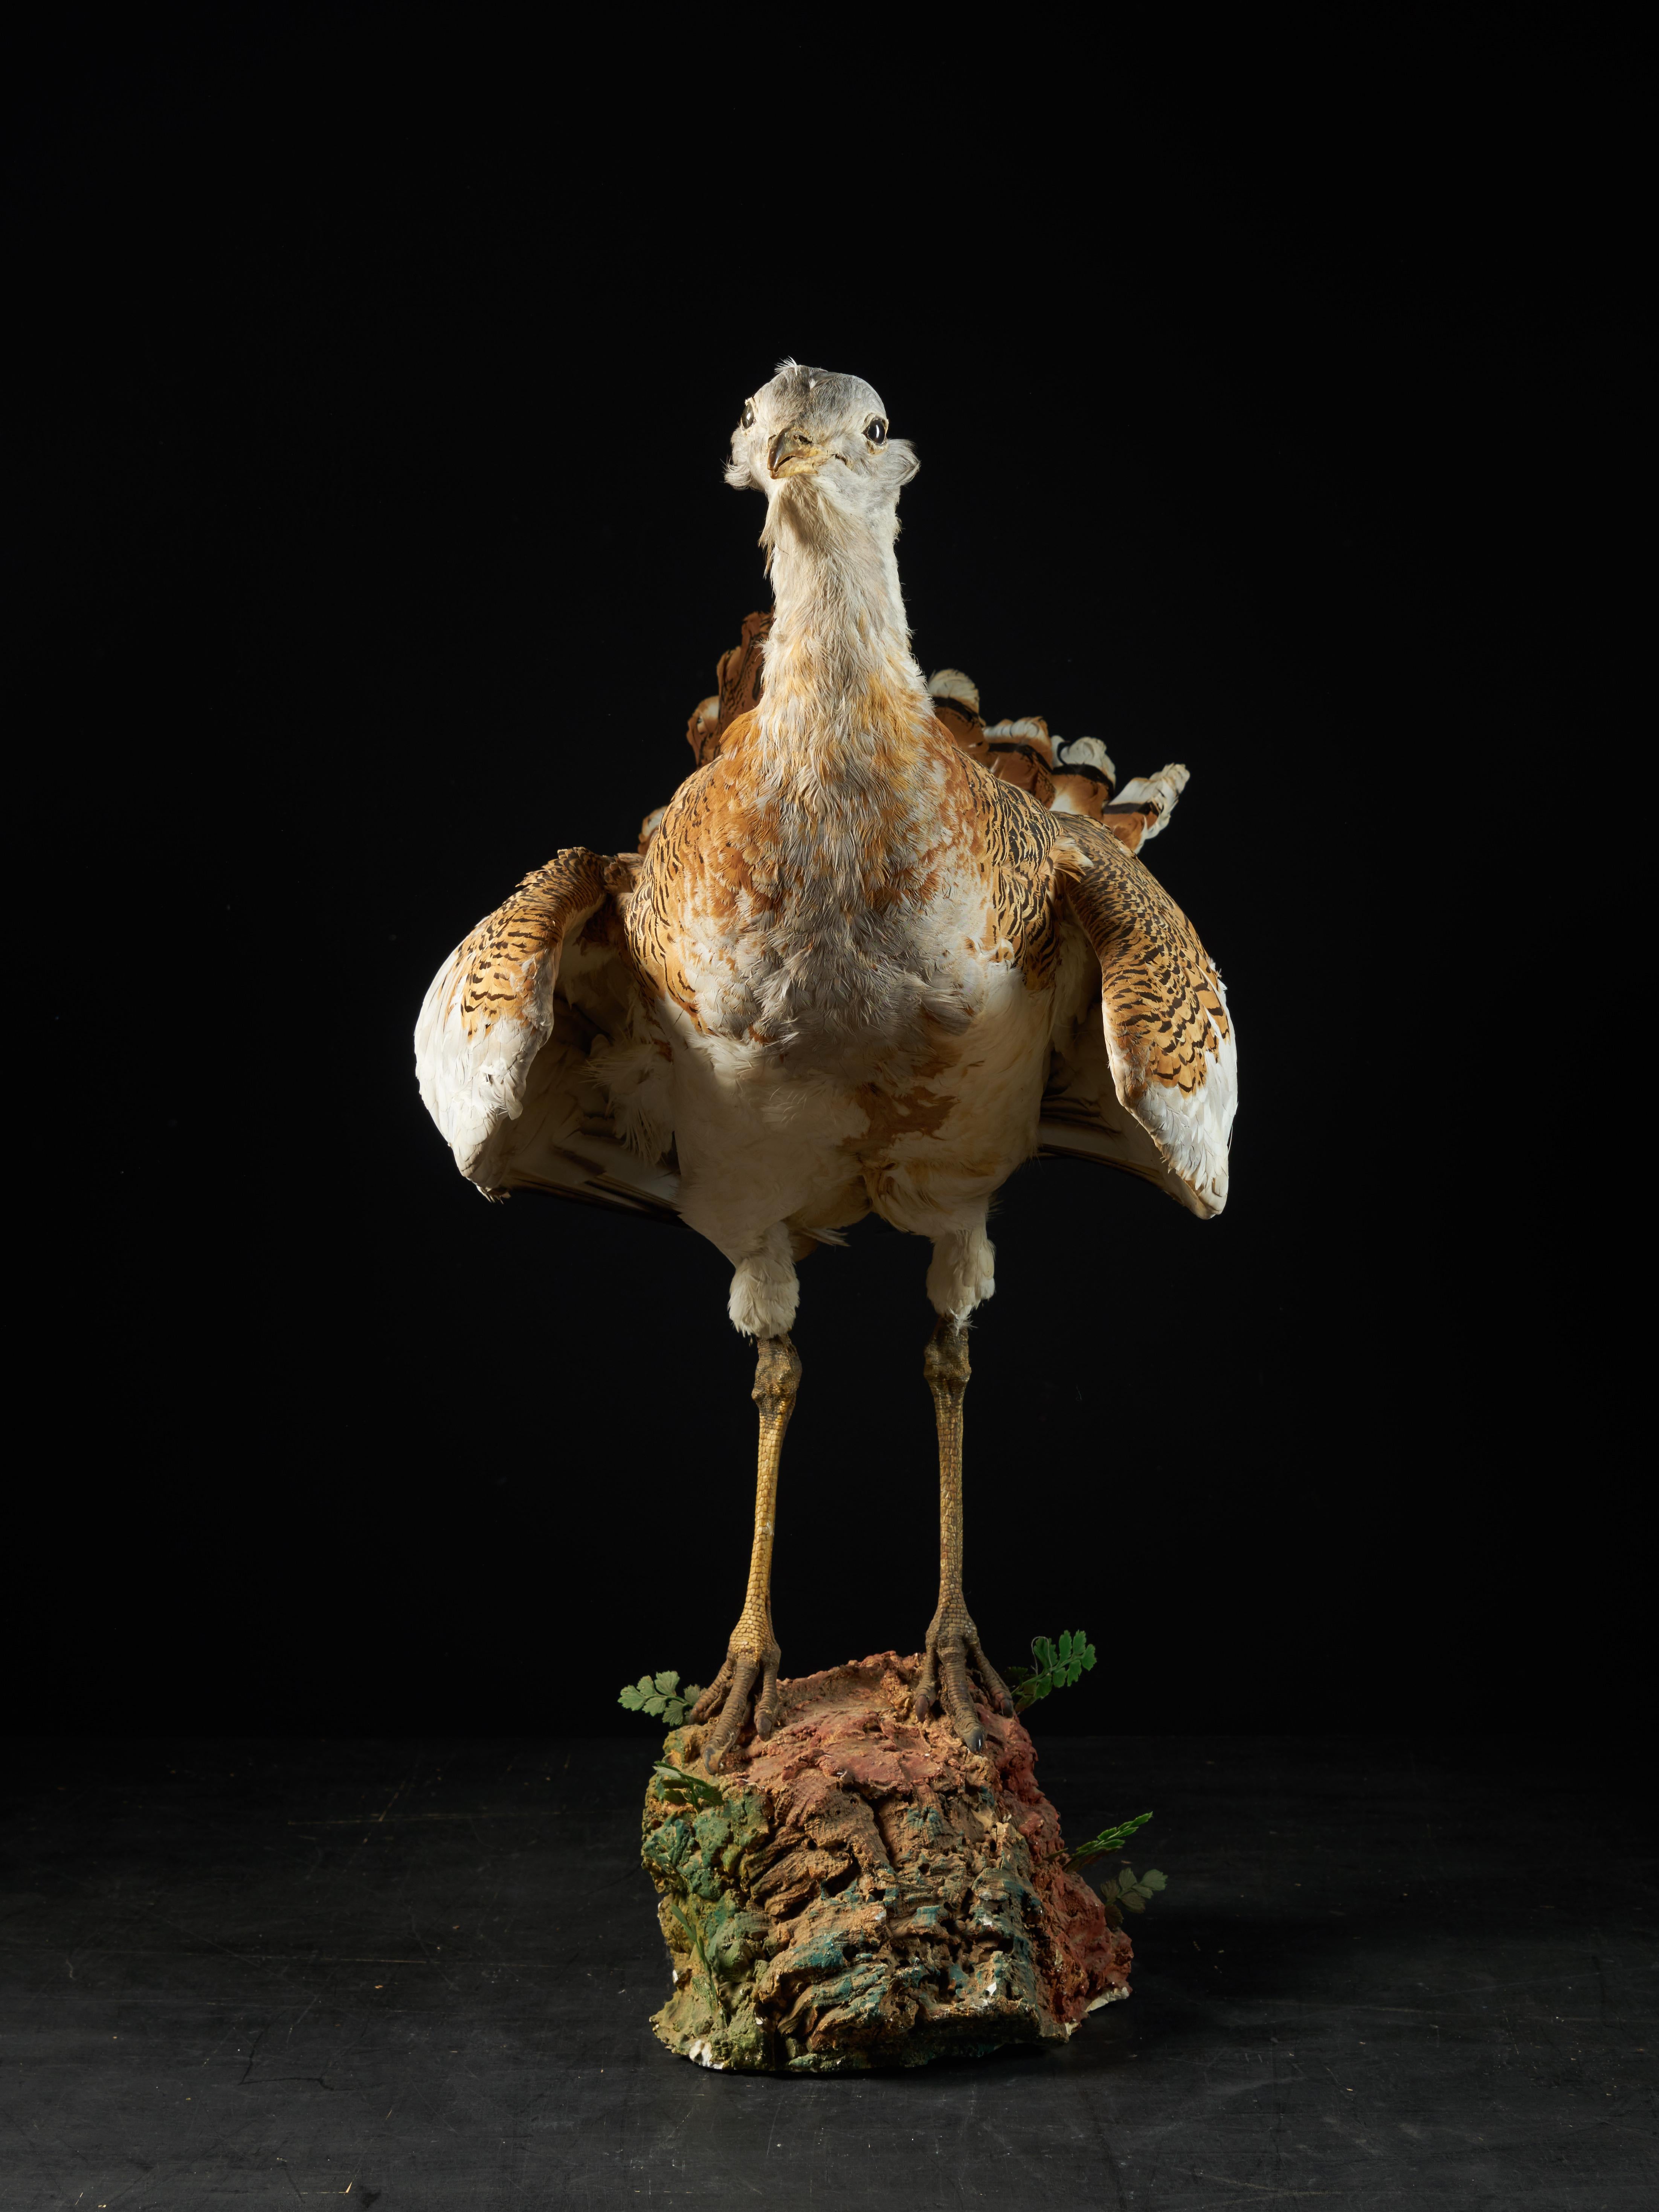 This is a taxidermy of a great bustard and was made in the second half of the 20th century. The bird is mounted on a rock in a resting position with its wings next to the body.